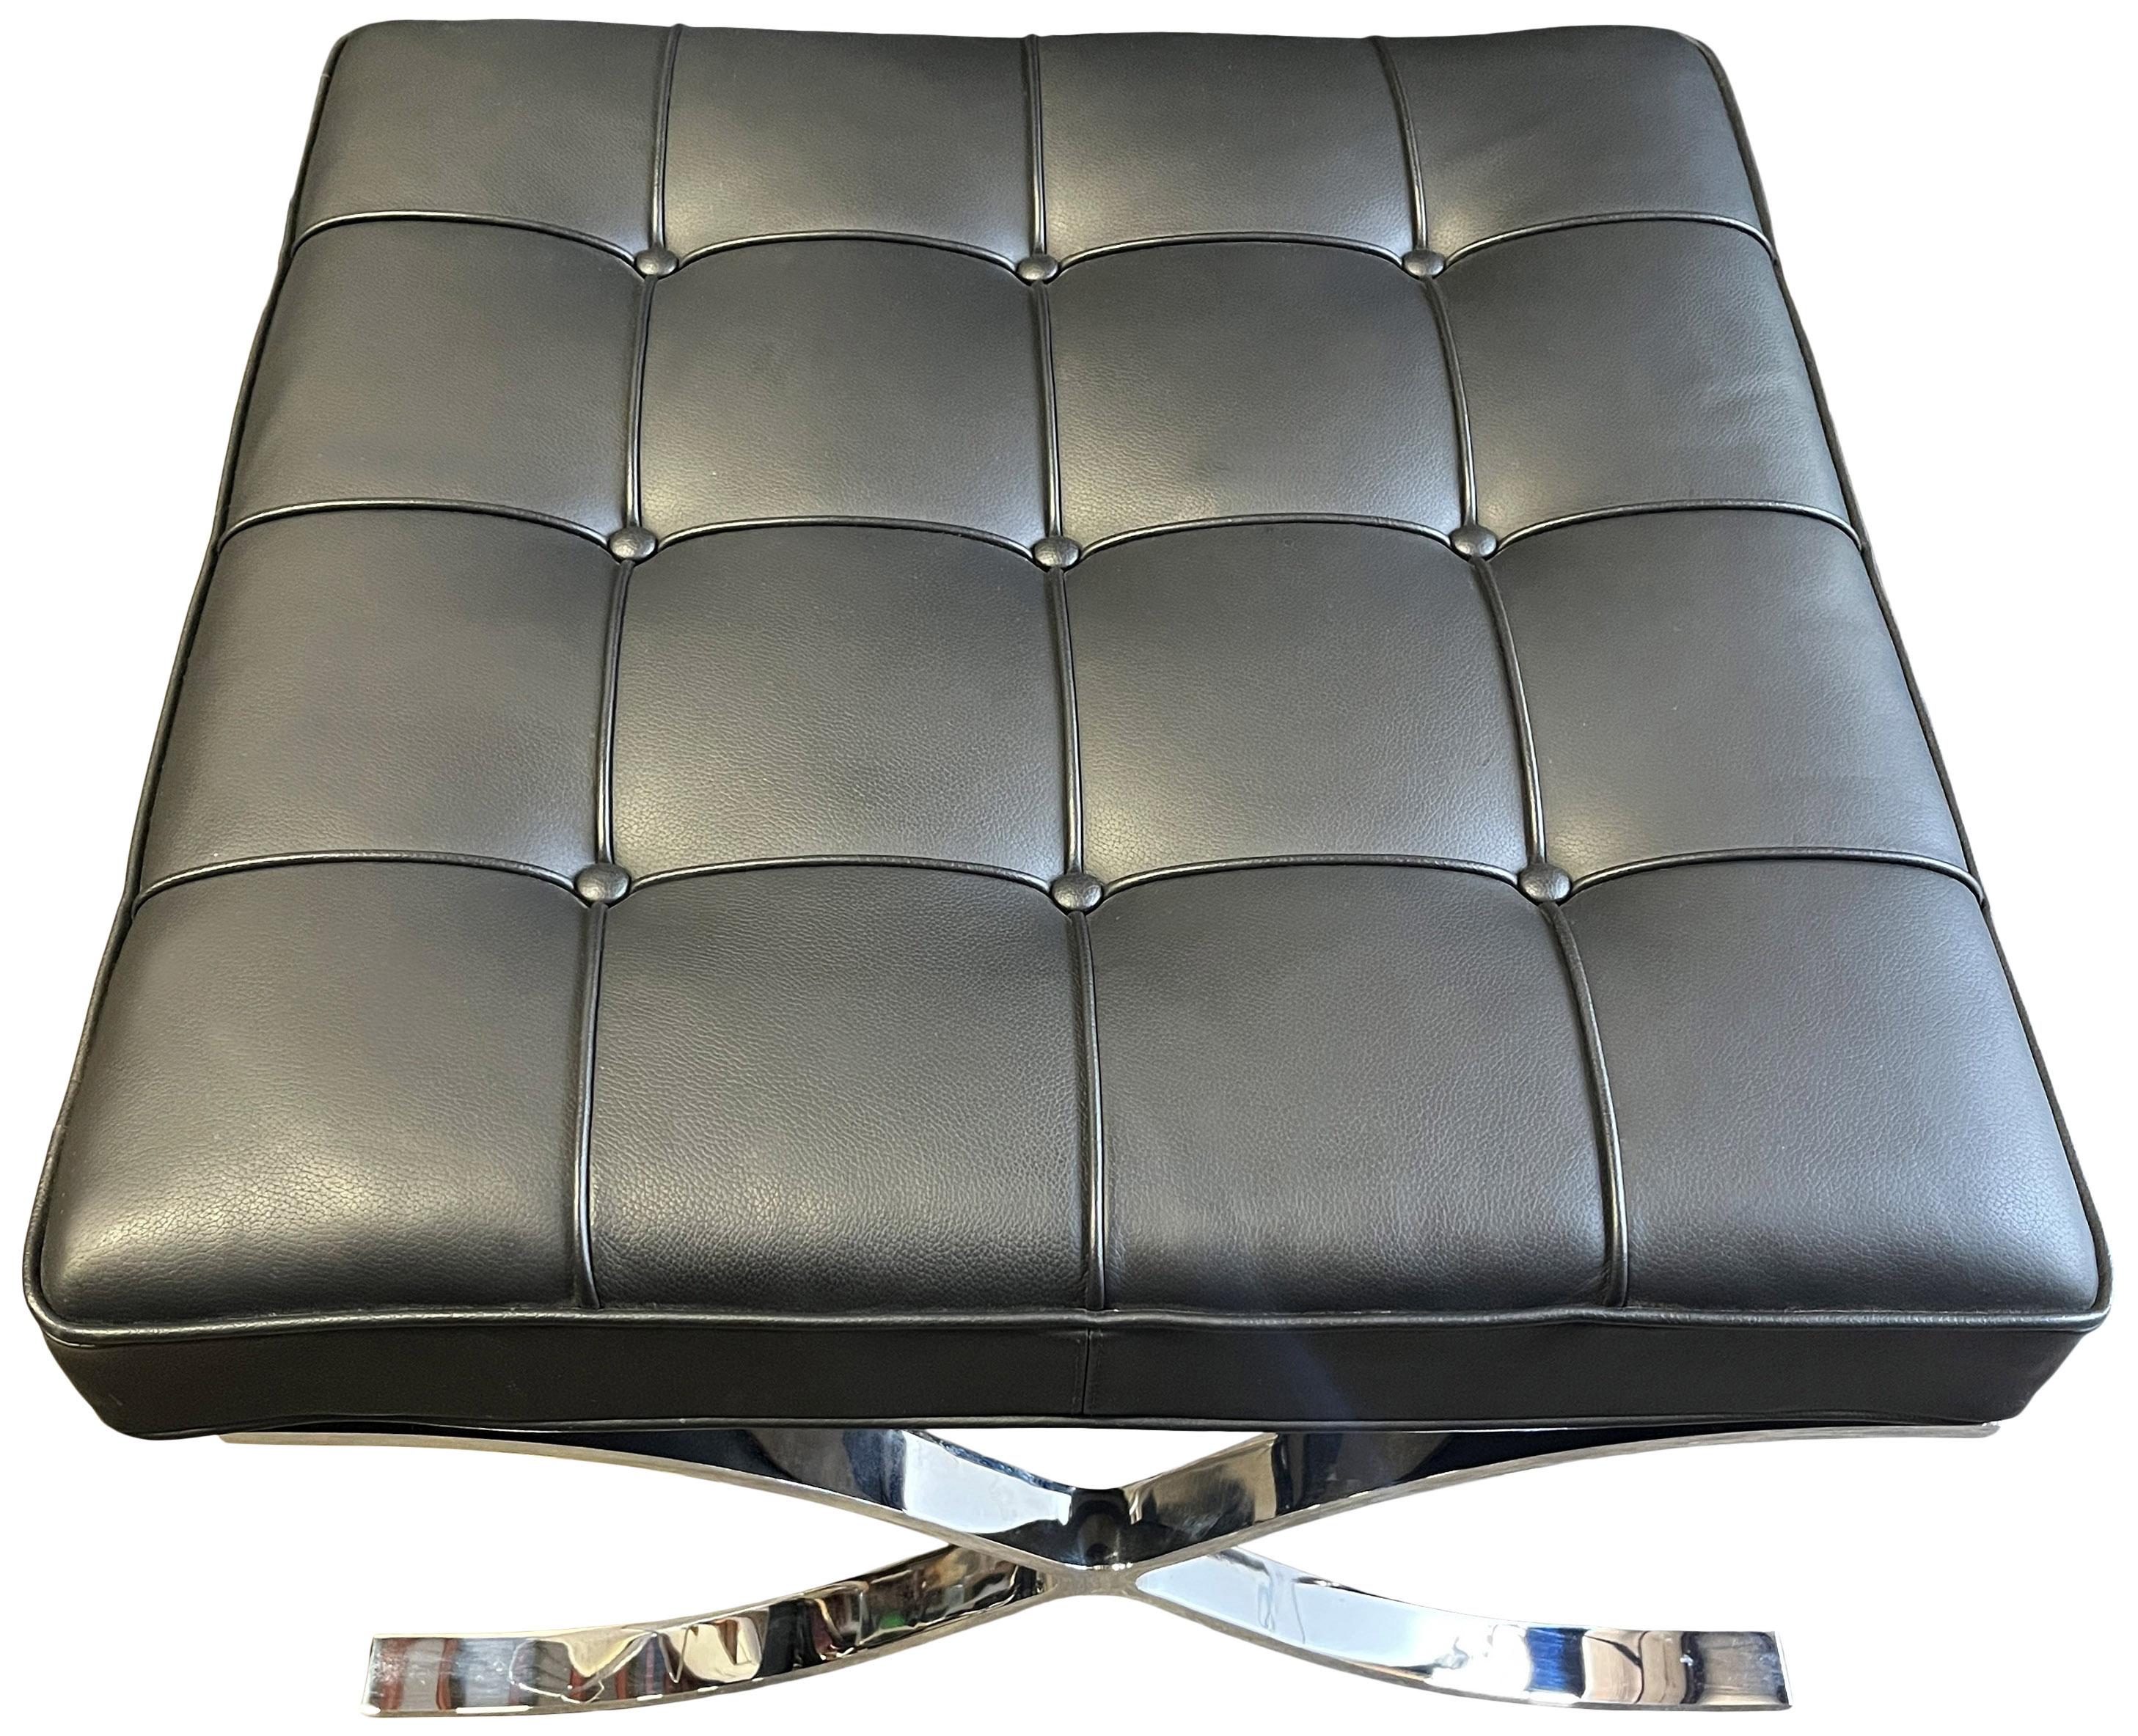 Midcentury Barcelona Ottomans / Stools in Black Leather for Knoll
 For Sale 4